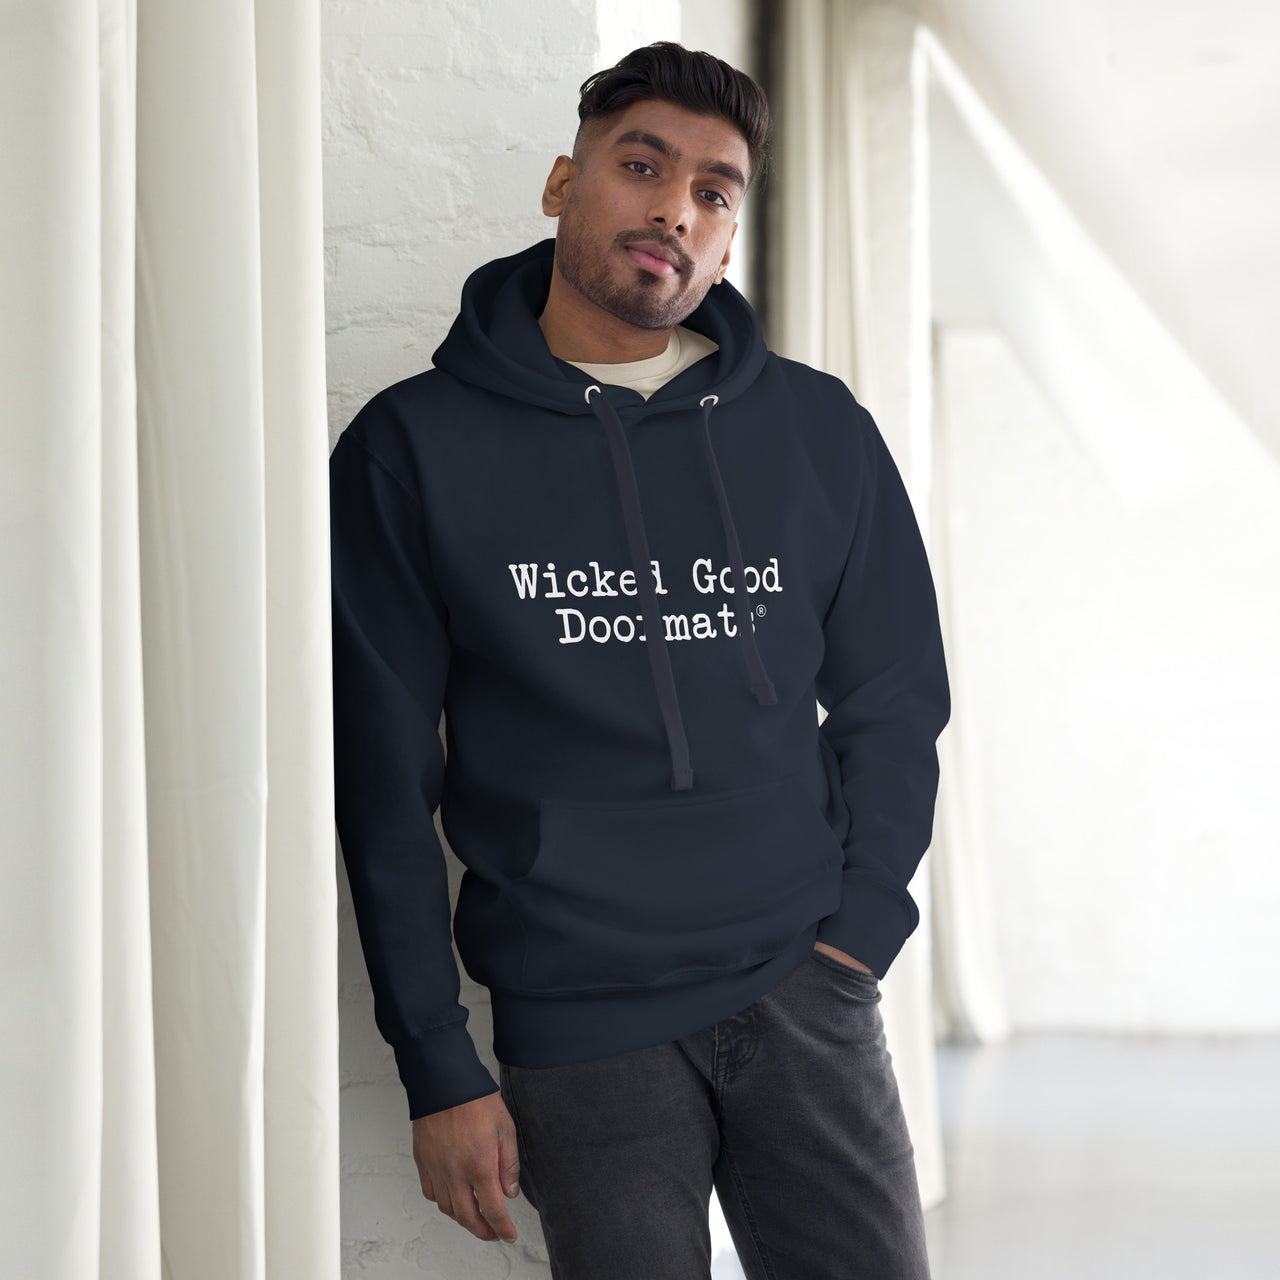 Wicked Good Doormats Hoodie 2 Shirts & Tops New England Trading Co   